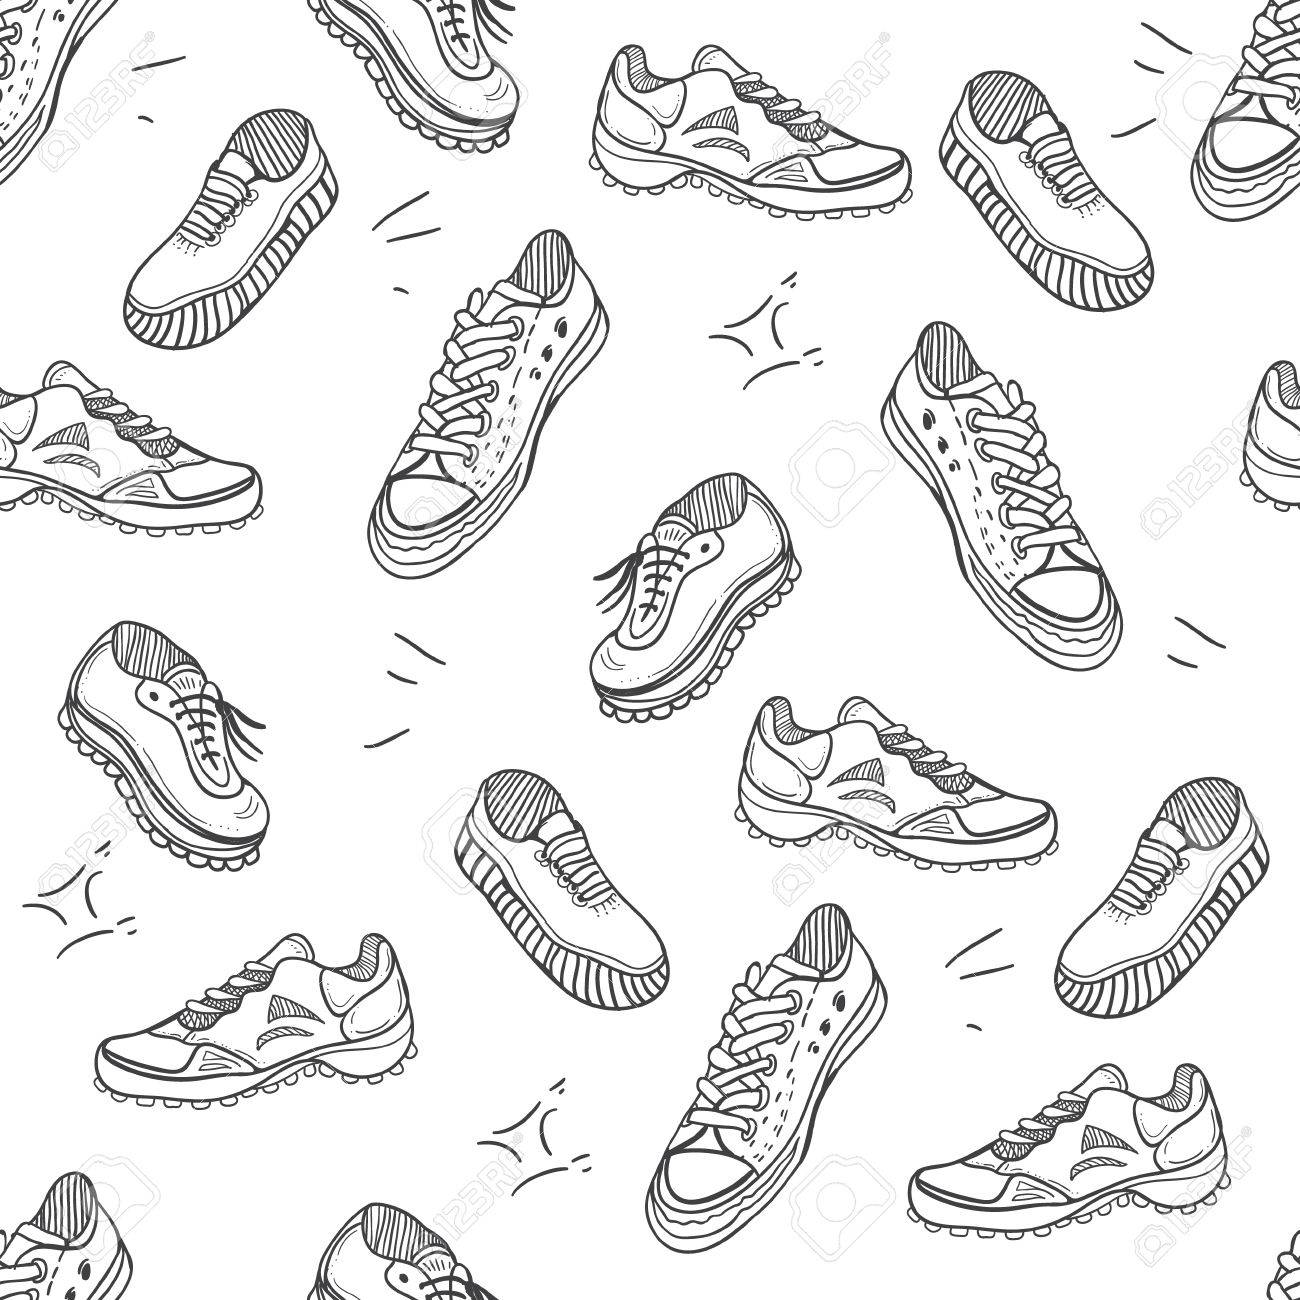 Boots Doodle Pattern Background With Shoes Sneakers